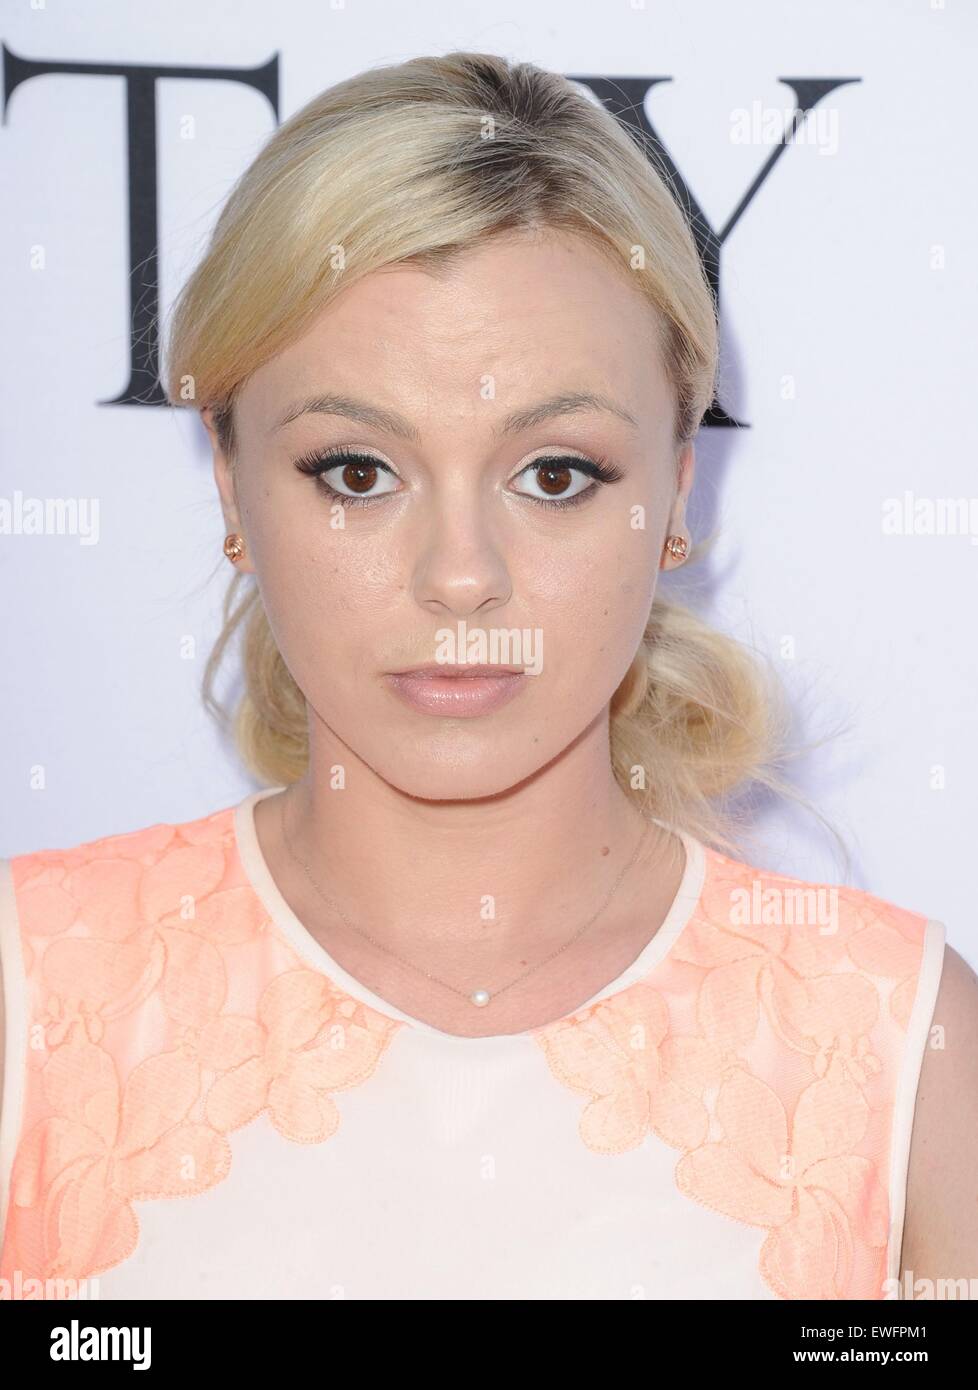 Bree olson pictures Los Angeles California Usa 24th June 2015 Bree Olson At Arrivals For Unity Premiere Dga Theater Los Angeles Ca June 24 2015 Credit Everett Collection Inc Alamy Live News Stock Photo Alamy